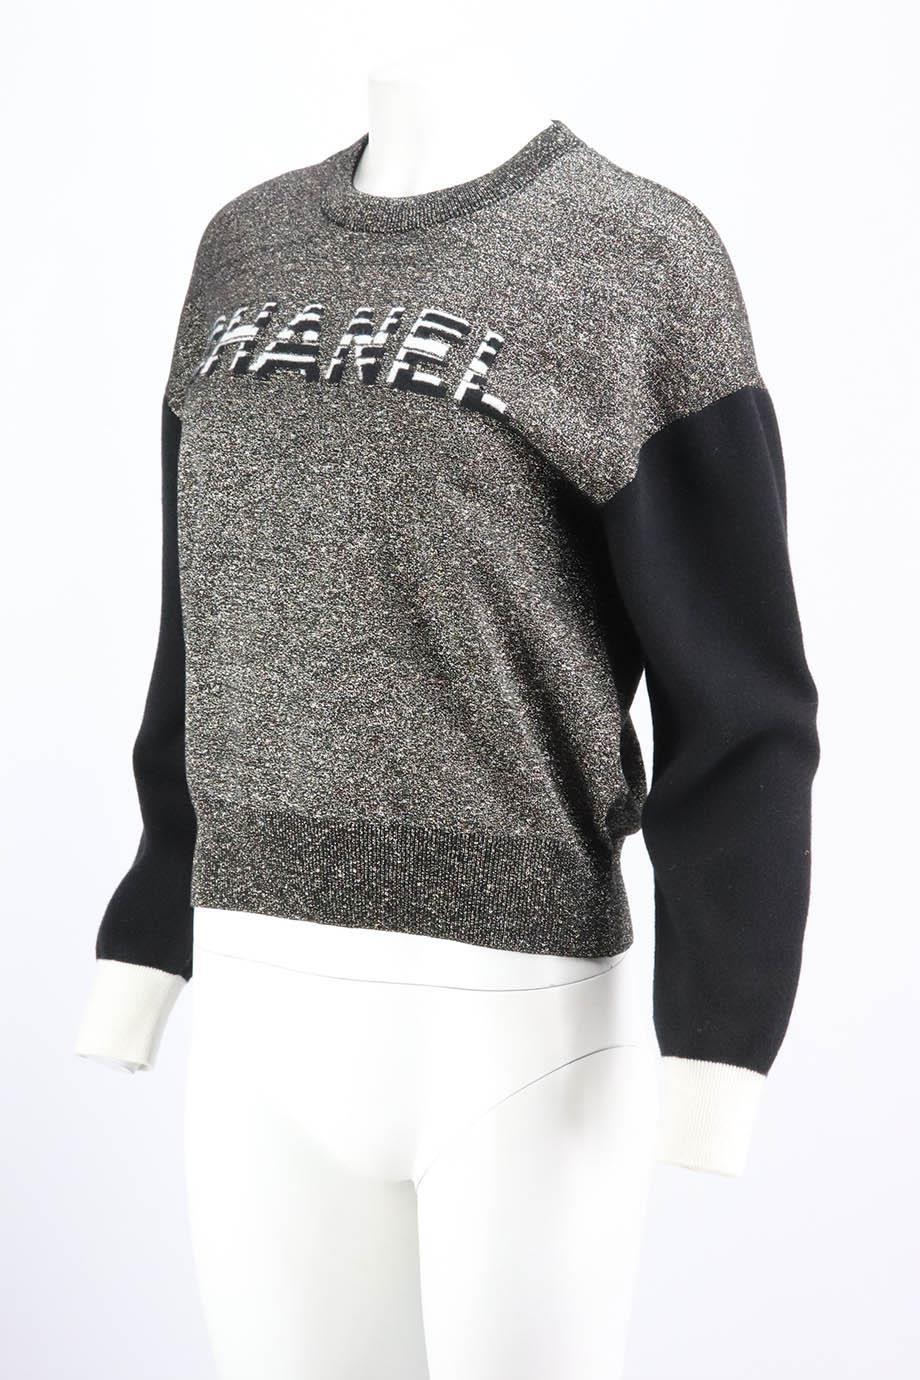 This sweater by Chanel from the brand’s 2019 collection is intarsia-knitted with the house's moniker across the chest, it’s spun from soft cashmere-blend sleeves with metallic body, it has a relaxed fit tempered by ribbed trims. Gold, silver, black